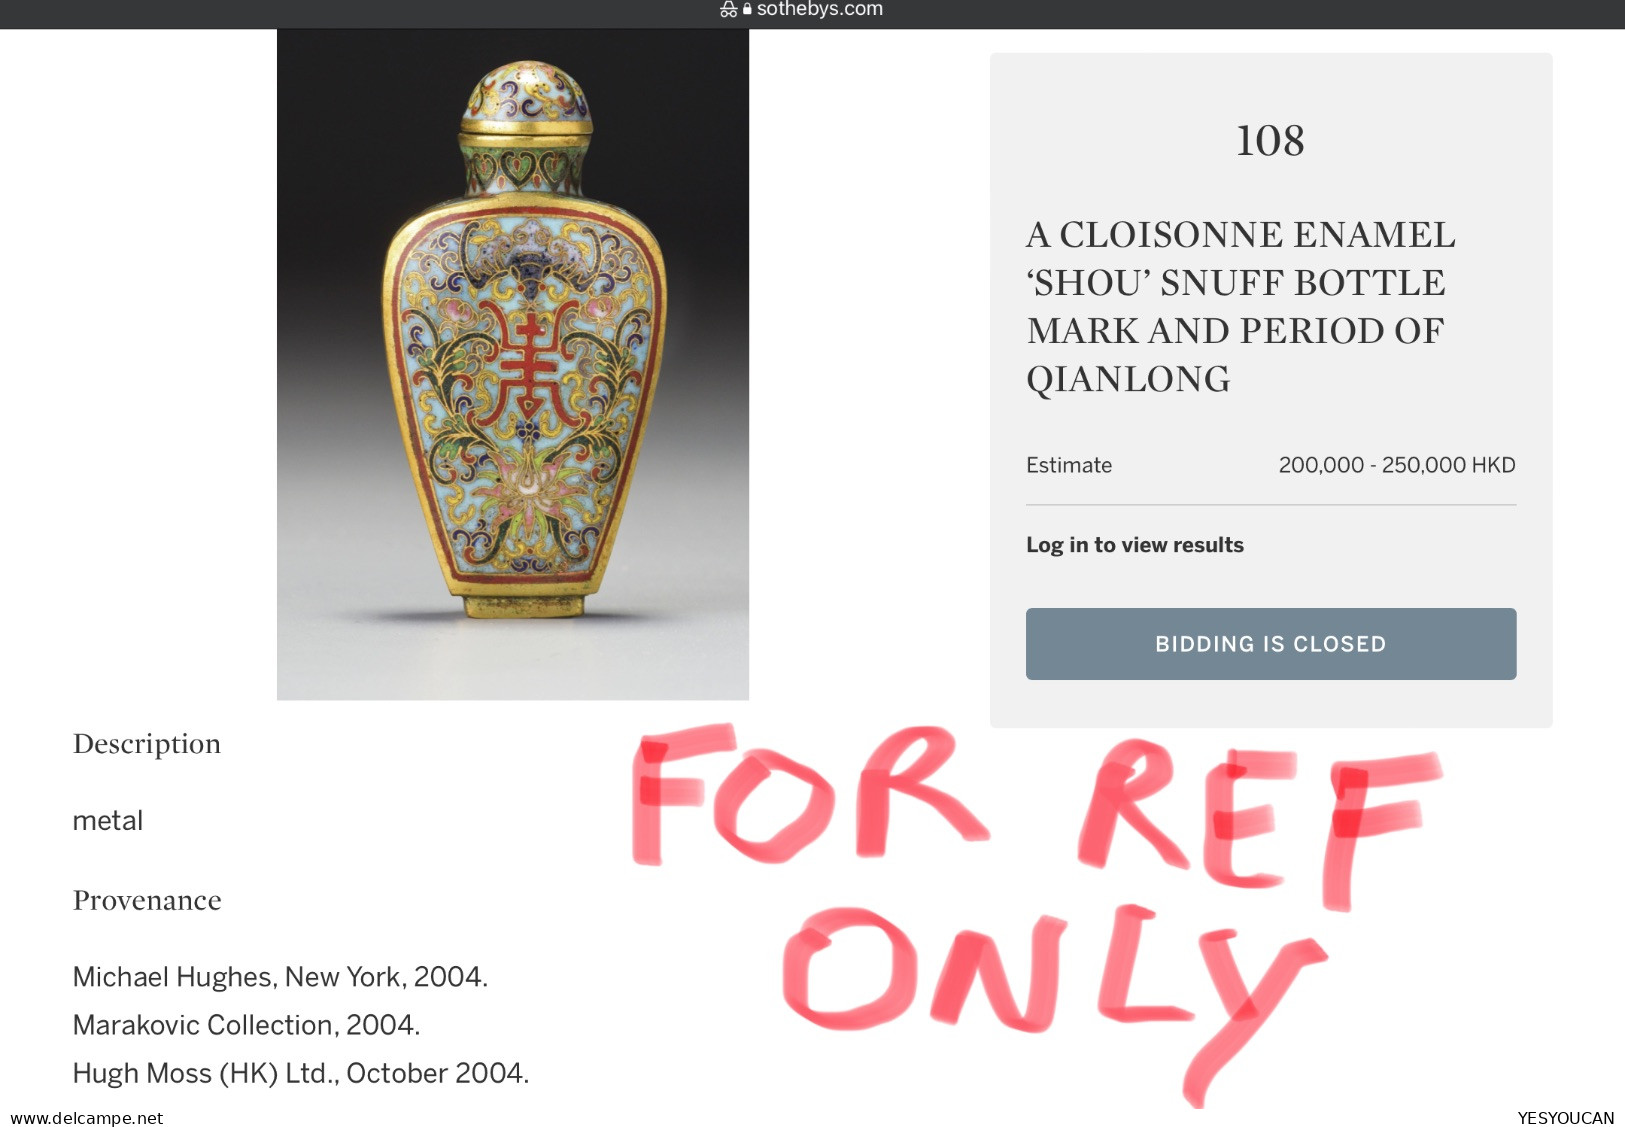 IMPERIAL CLOISONNE ENAMEL SNUFF BOTTLE, QIANLONG MARK AND PERIOD 1736-1795 (Chinese art antiques China